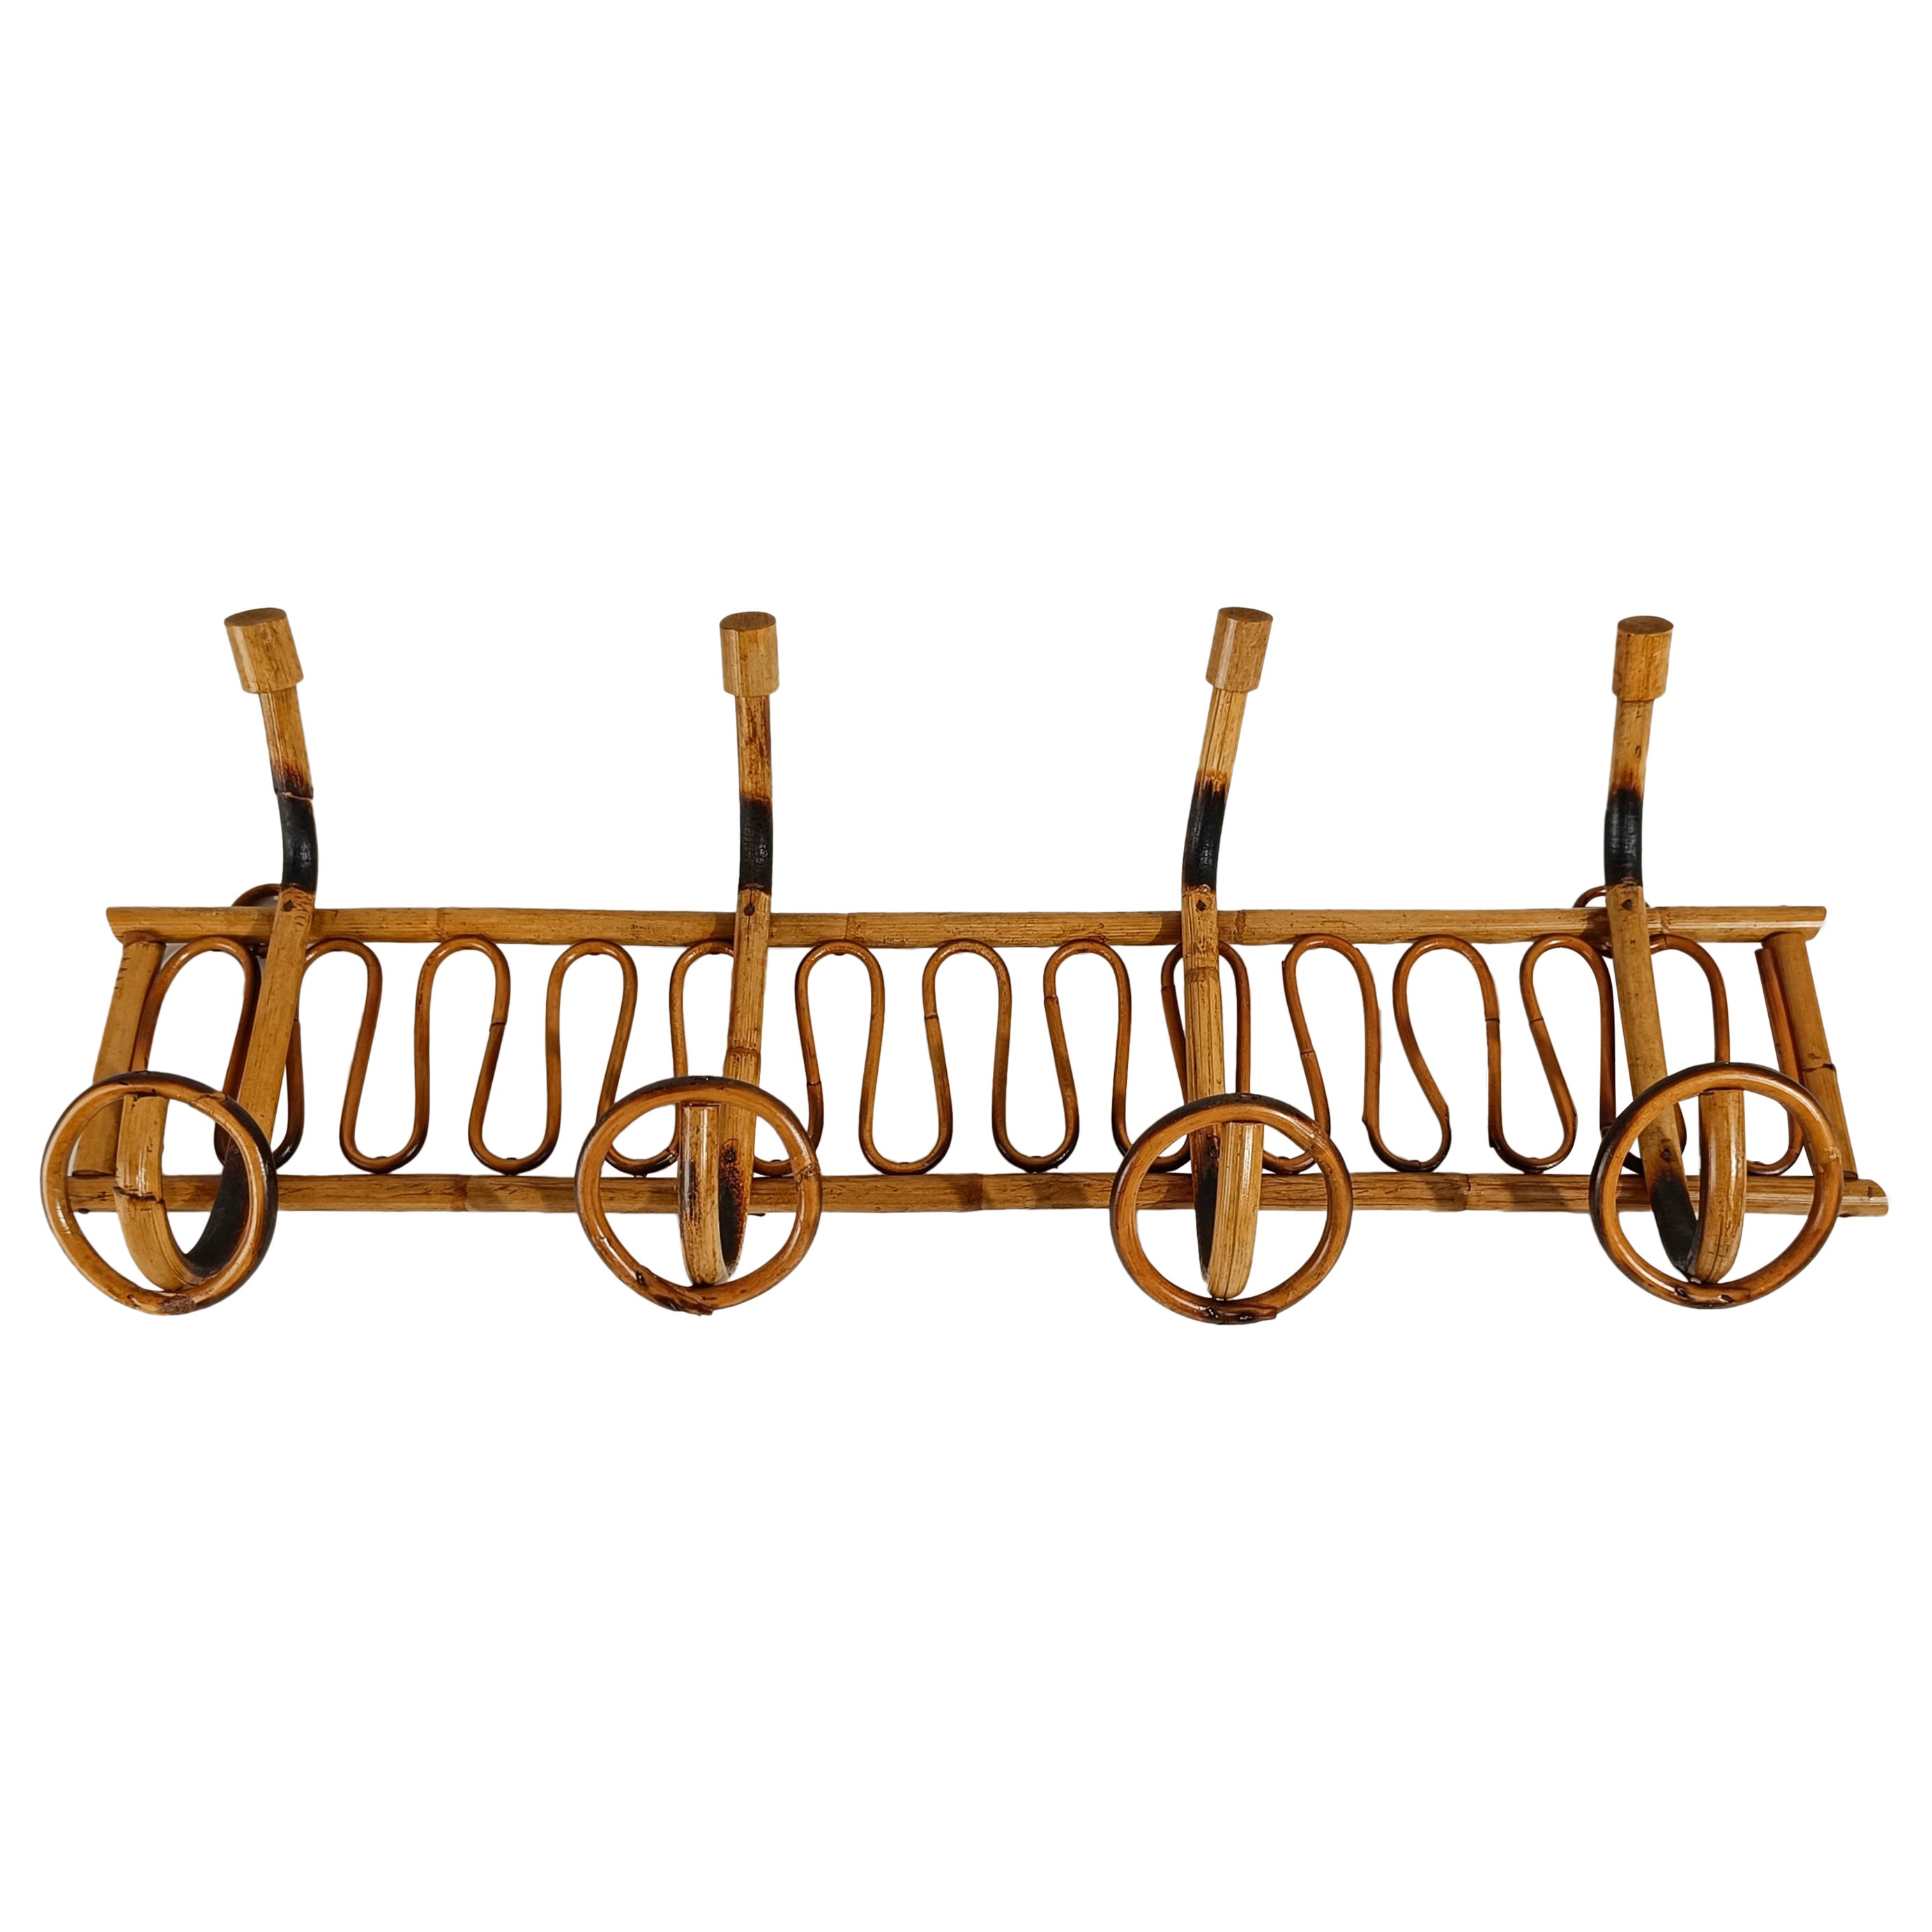 Midcentury Italian Riviera Rattan and Bamboo Wall Coat Rack / Wall Hanger 1960s For Sale